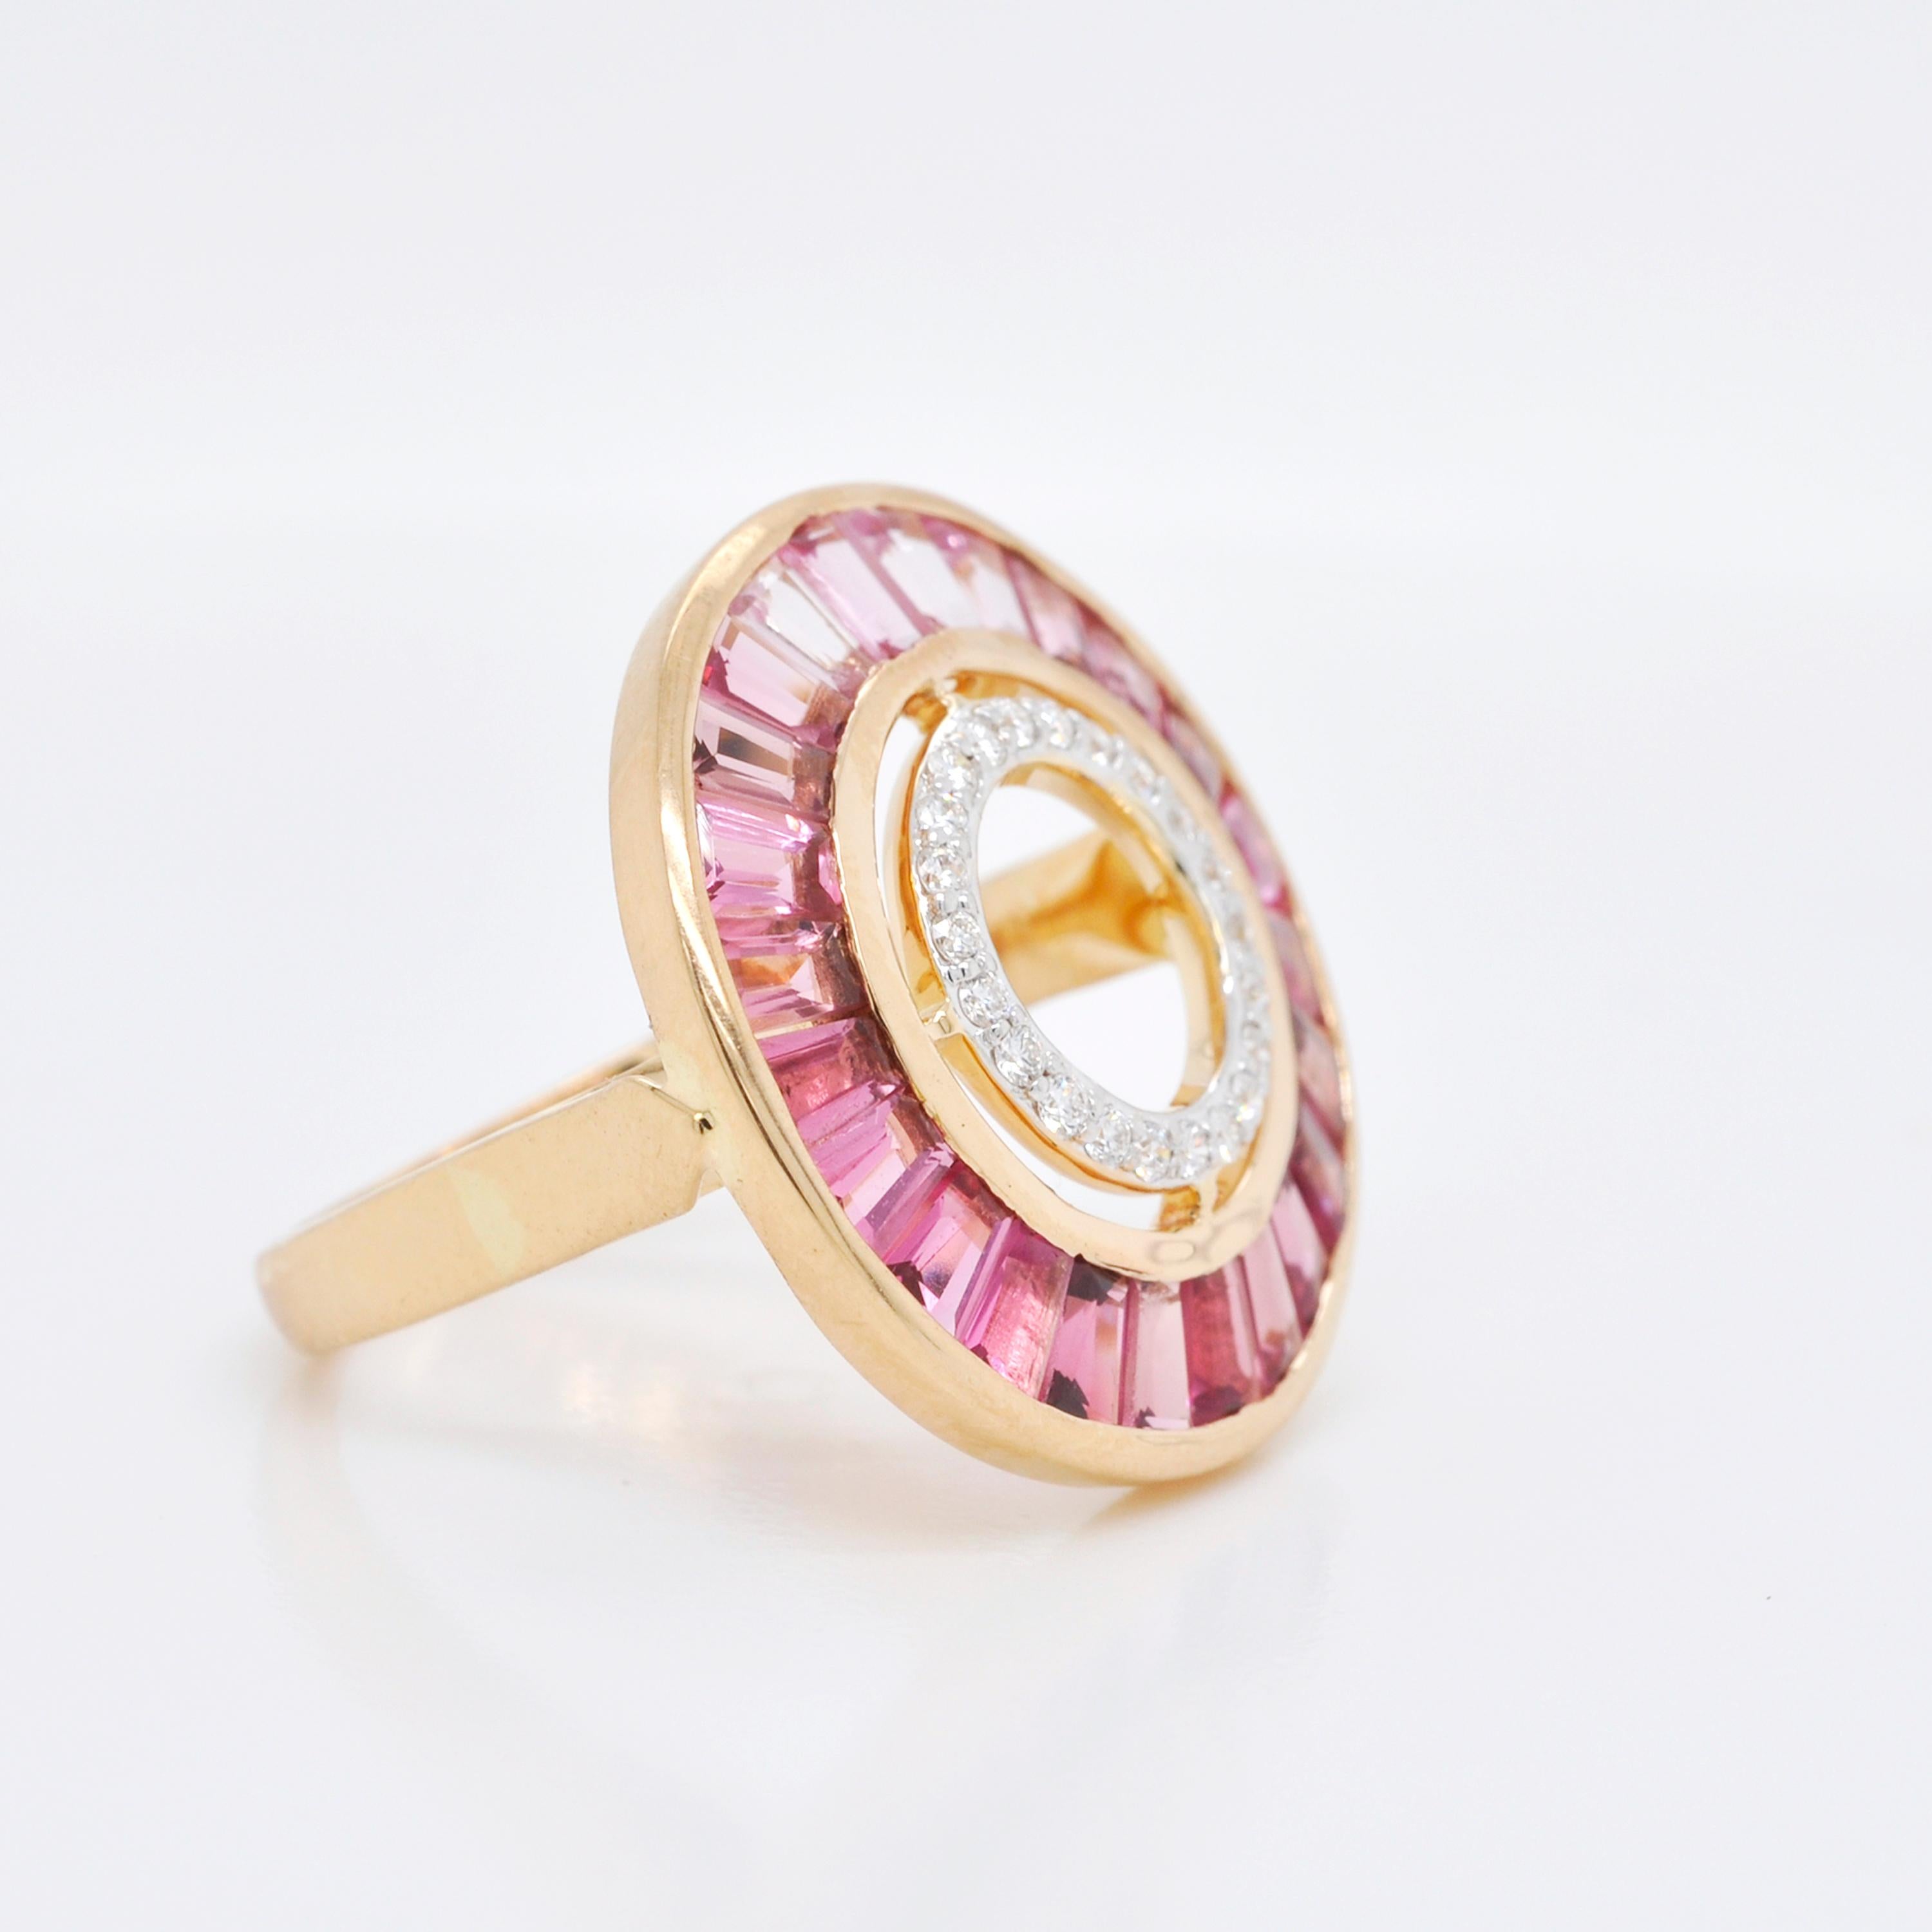 18 Karat Gold Custom Cut Pink Tourmaline Baguette Diamond Art Deco Style Ring In New Condition For Sale In Jaipur, Rajasthan